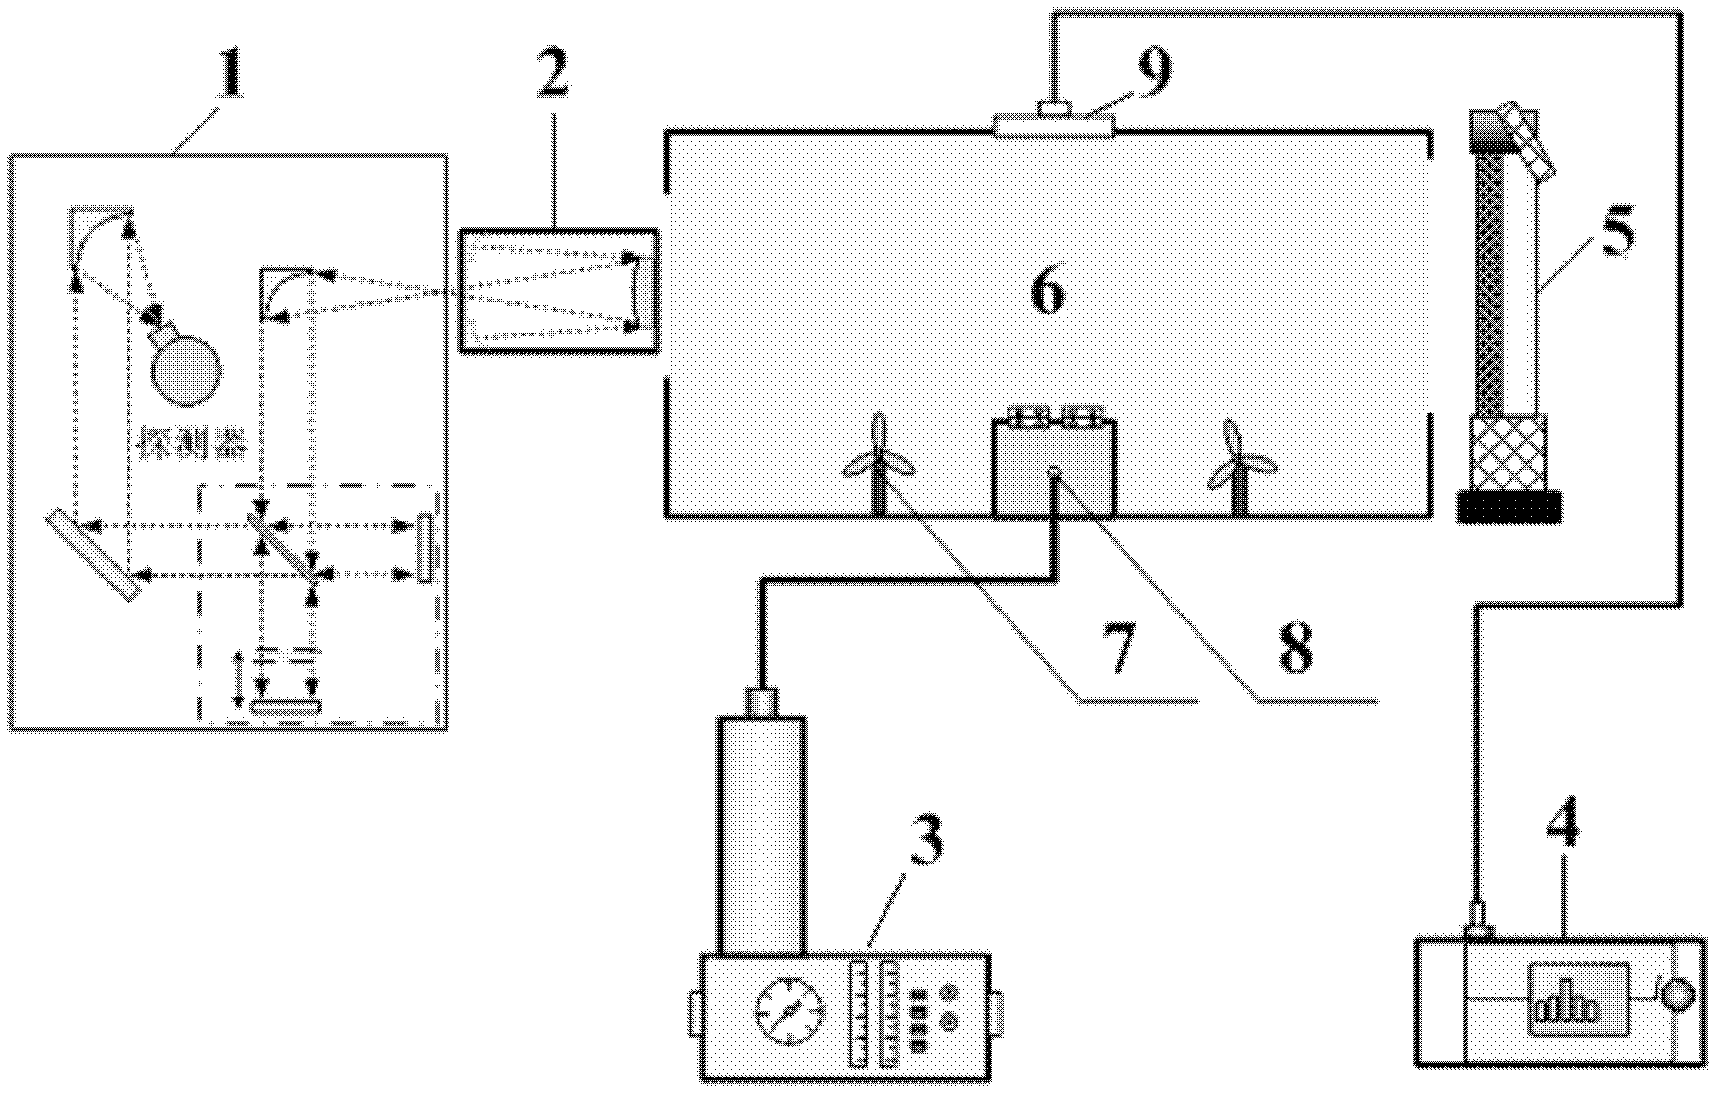 Simulated telemetry system and method for infrared extinction and particle size of bio-aerosol